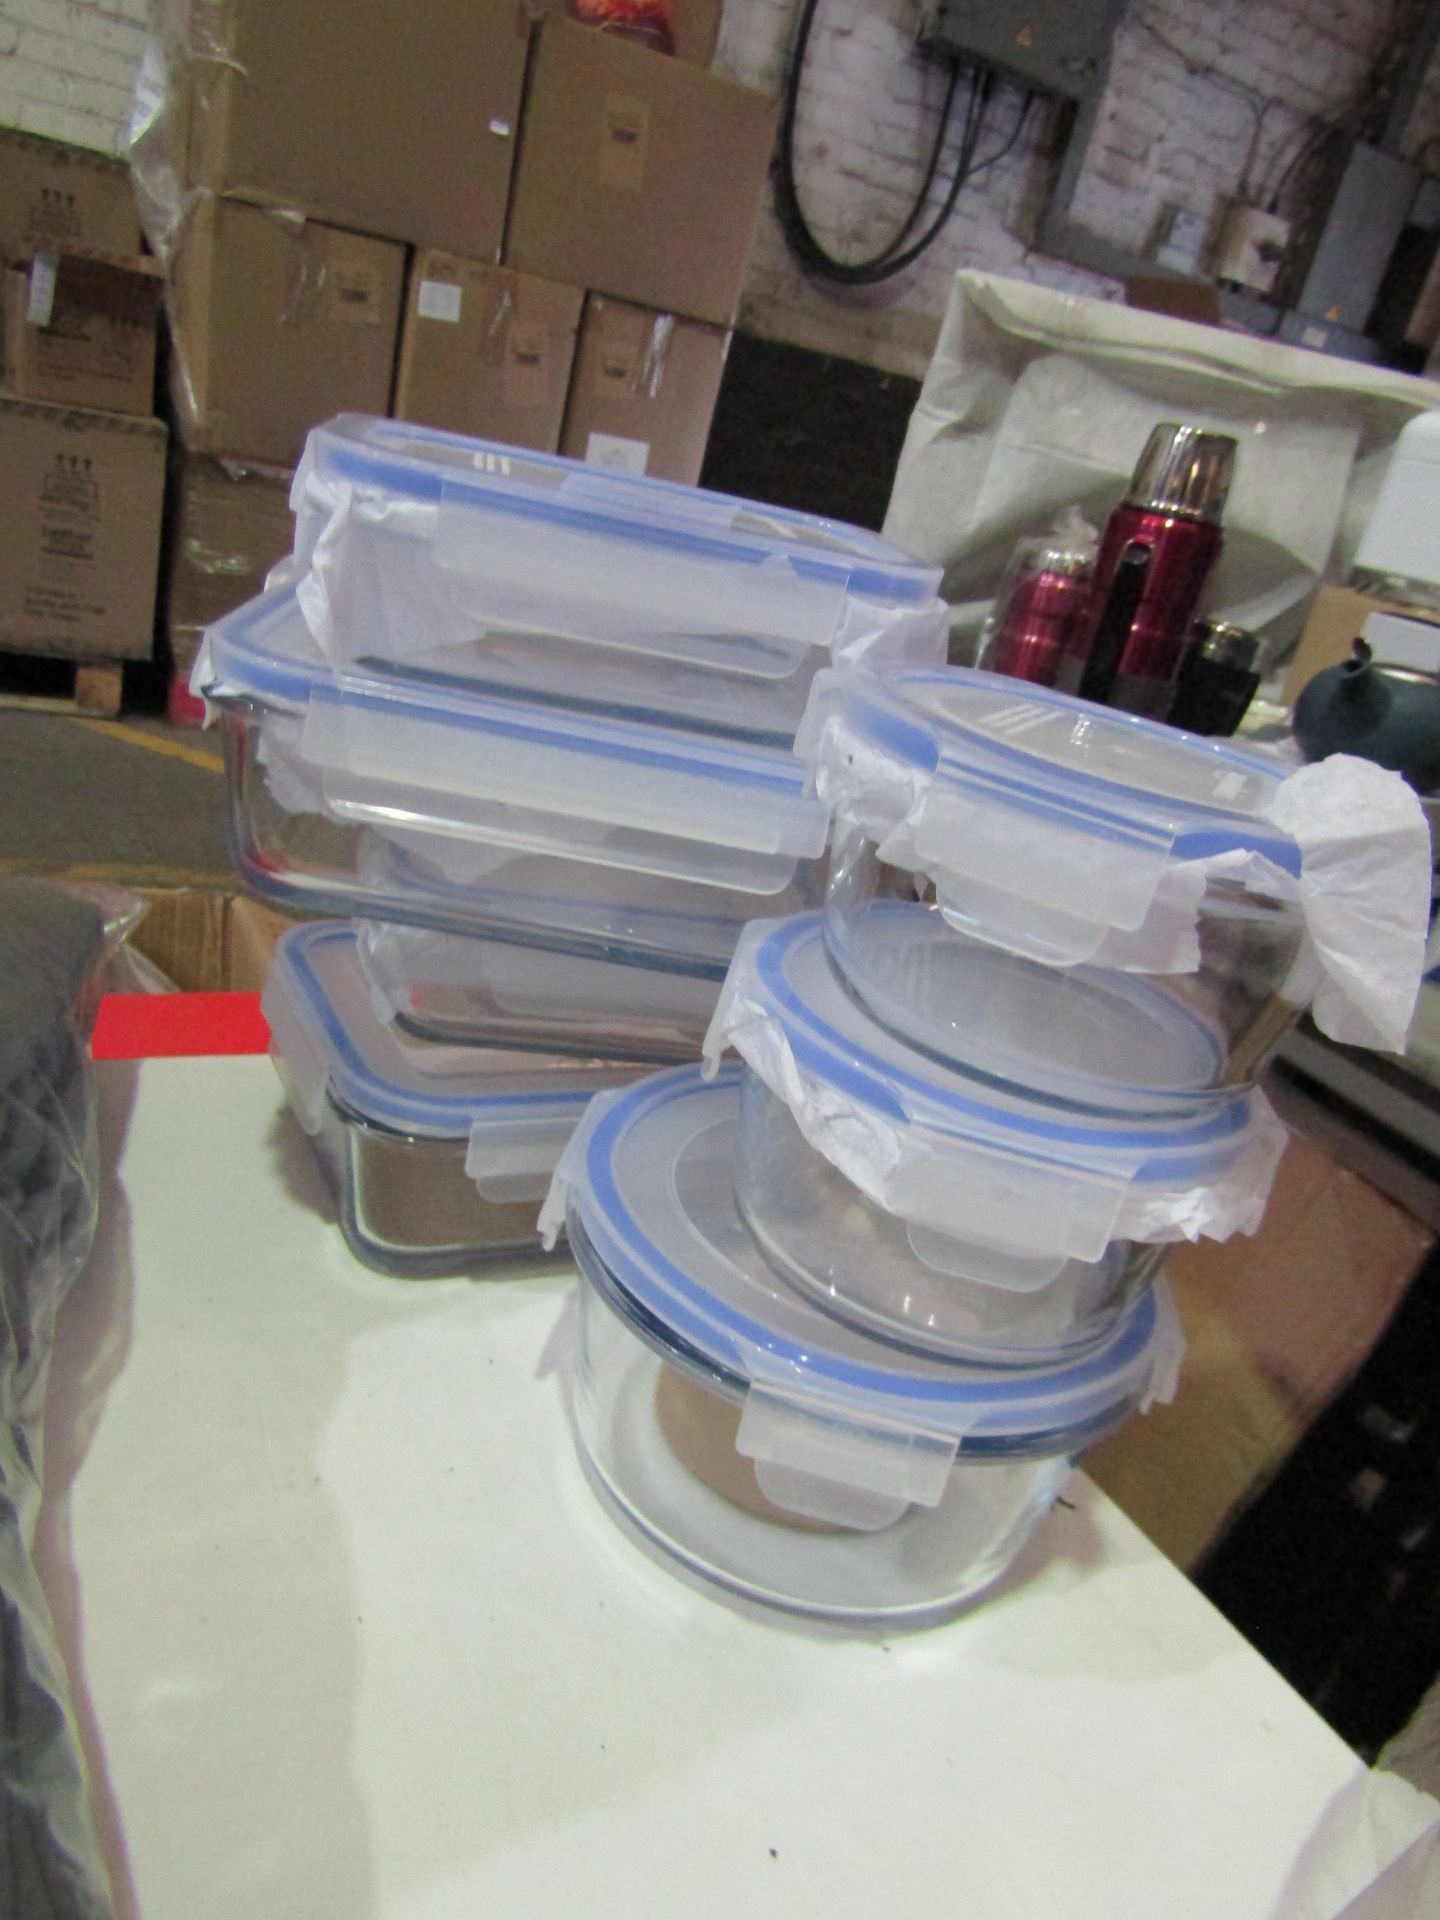 7x Various Plastic Storage Containers With Lids - All Appear To Be Im Good Condition.